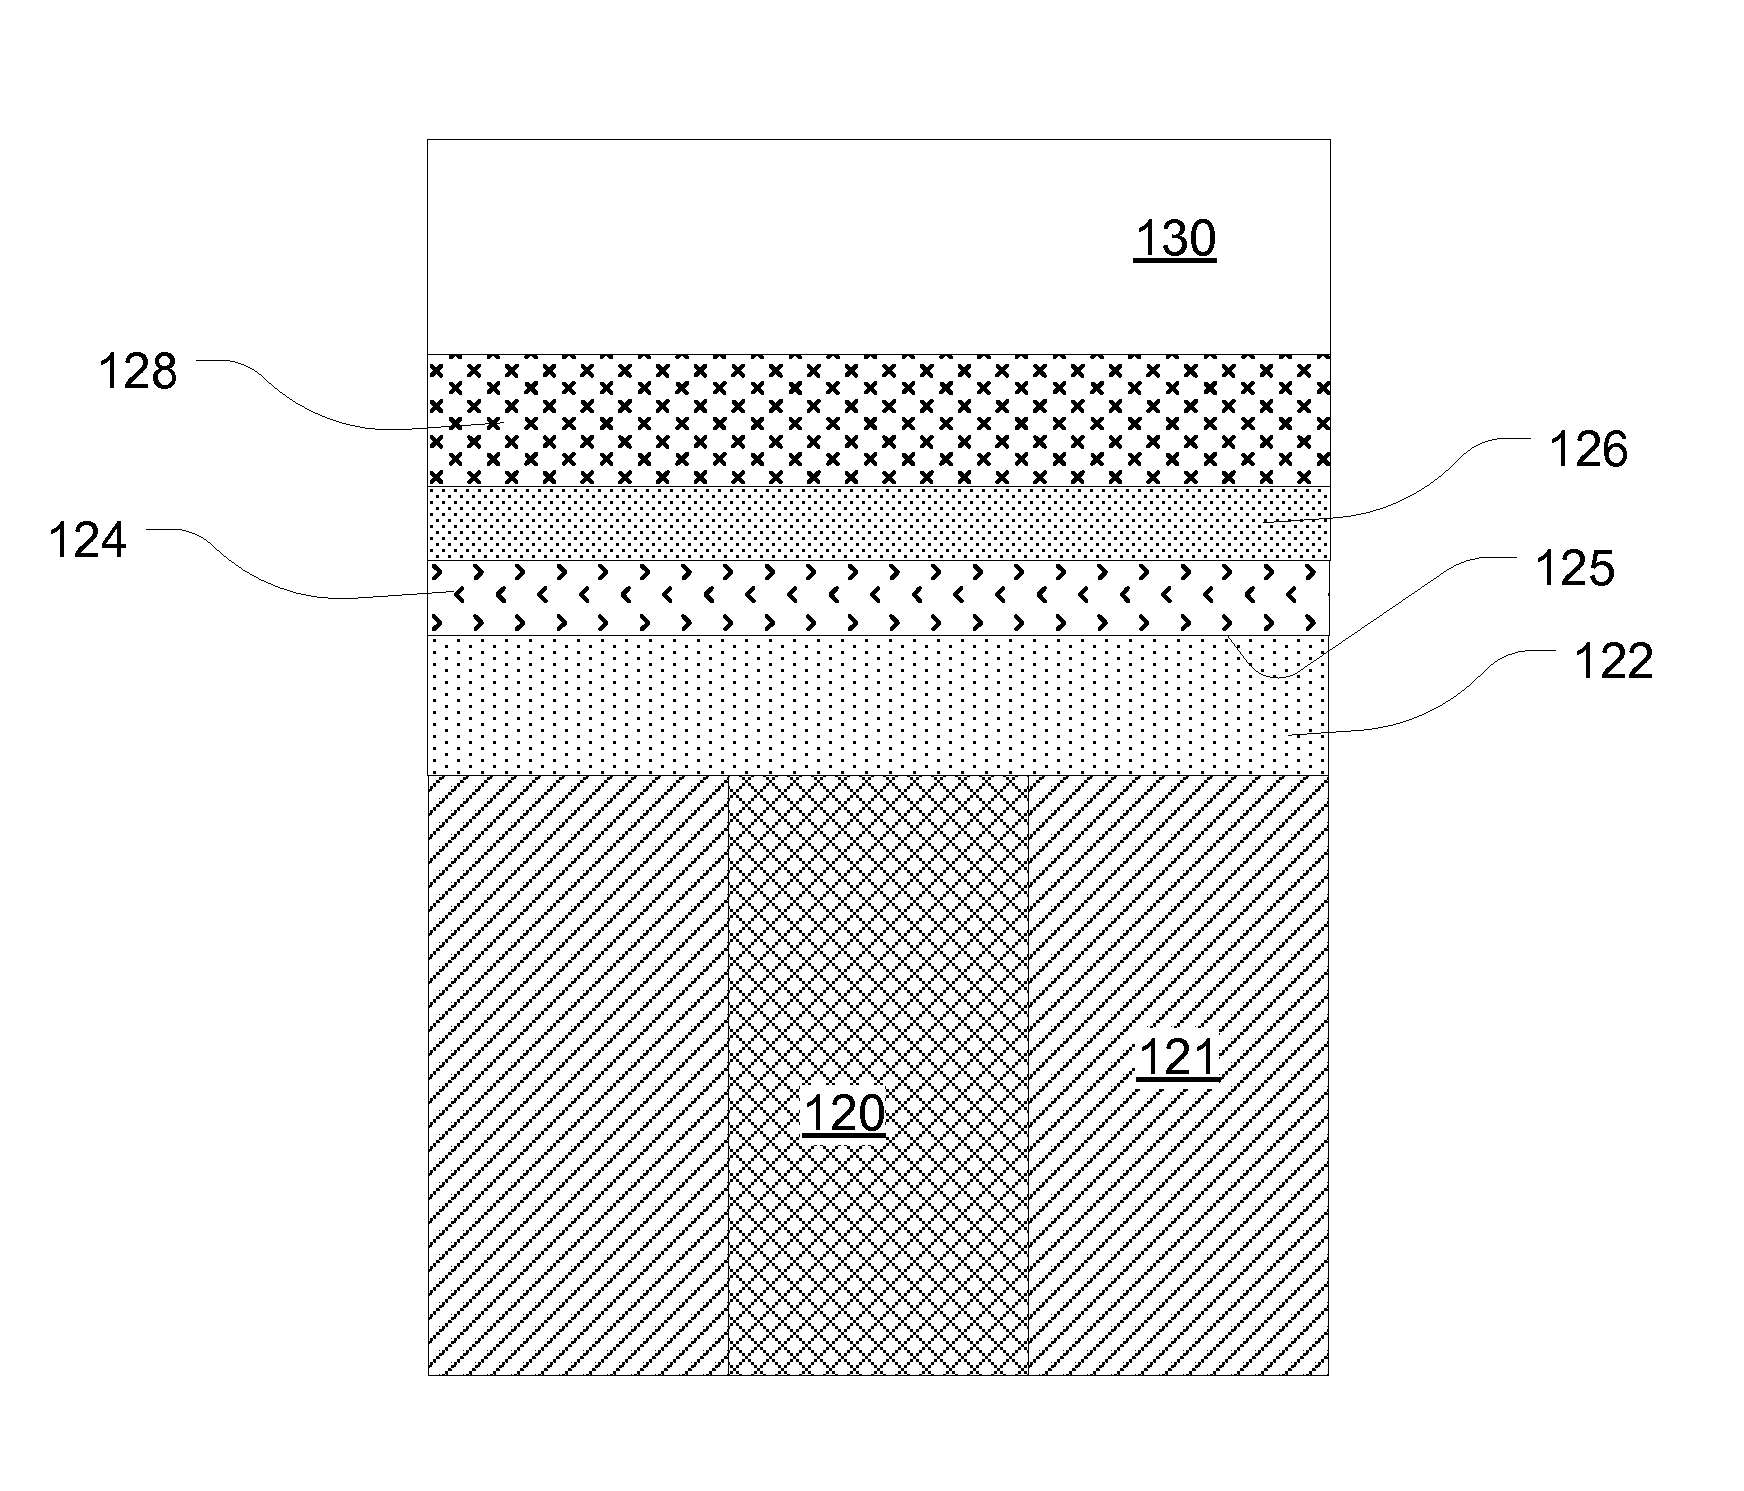 Programmable metallization cell with two dielectric layers